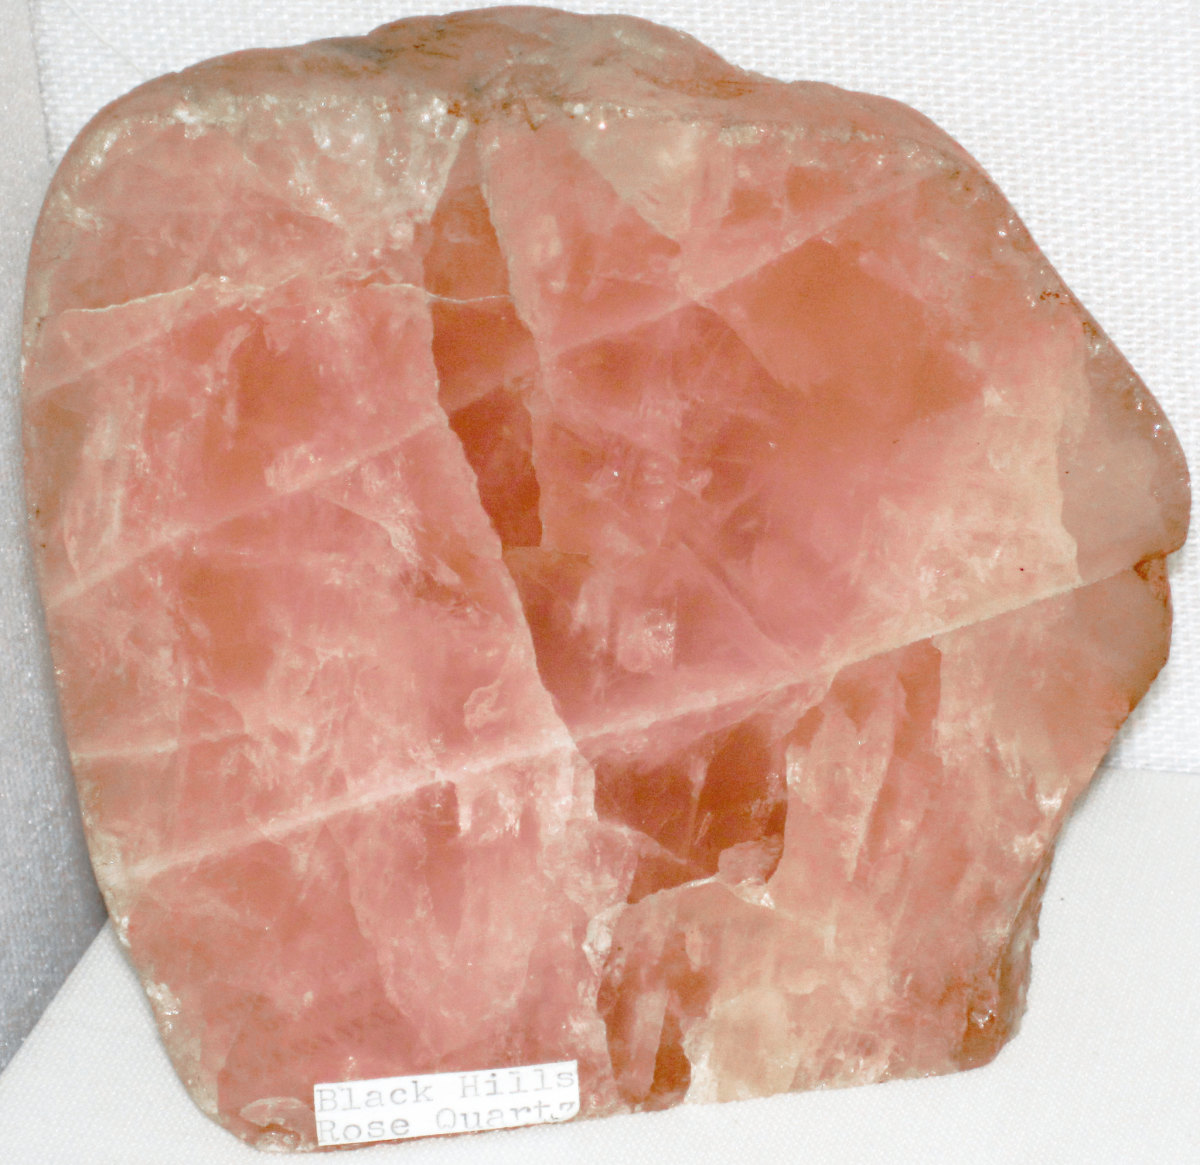 Rose quartz is linked to the heart chakra, love and emotions.